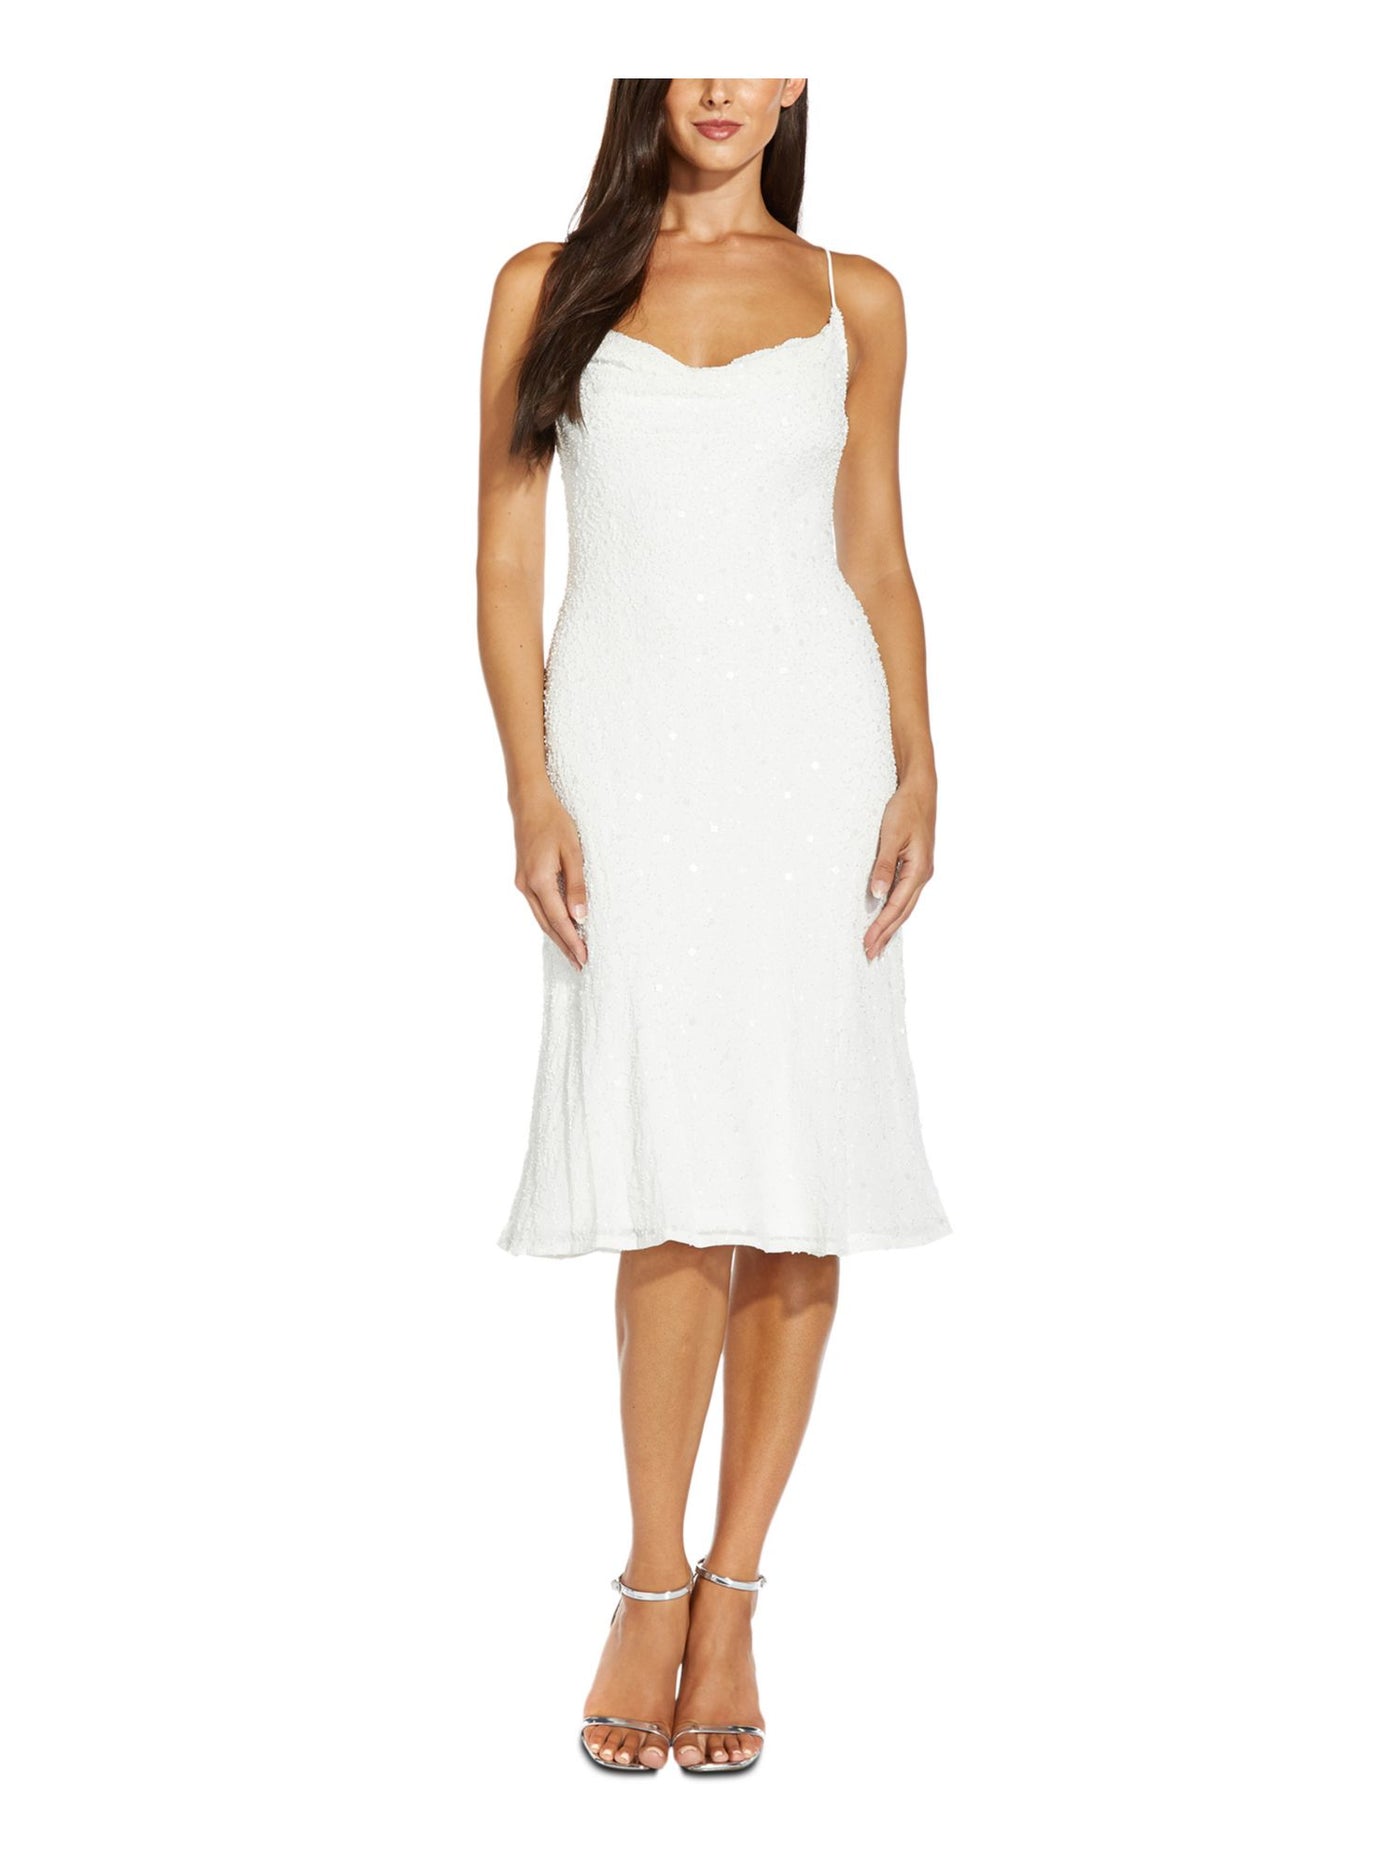 ADRIANNA PAPELL Womens White Beaded Zippered Spaghetti Strap Cowl Neck Knee Length Evening Fit + Flare Dress 16